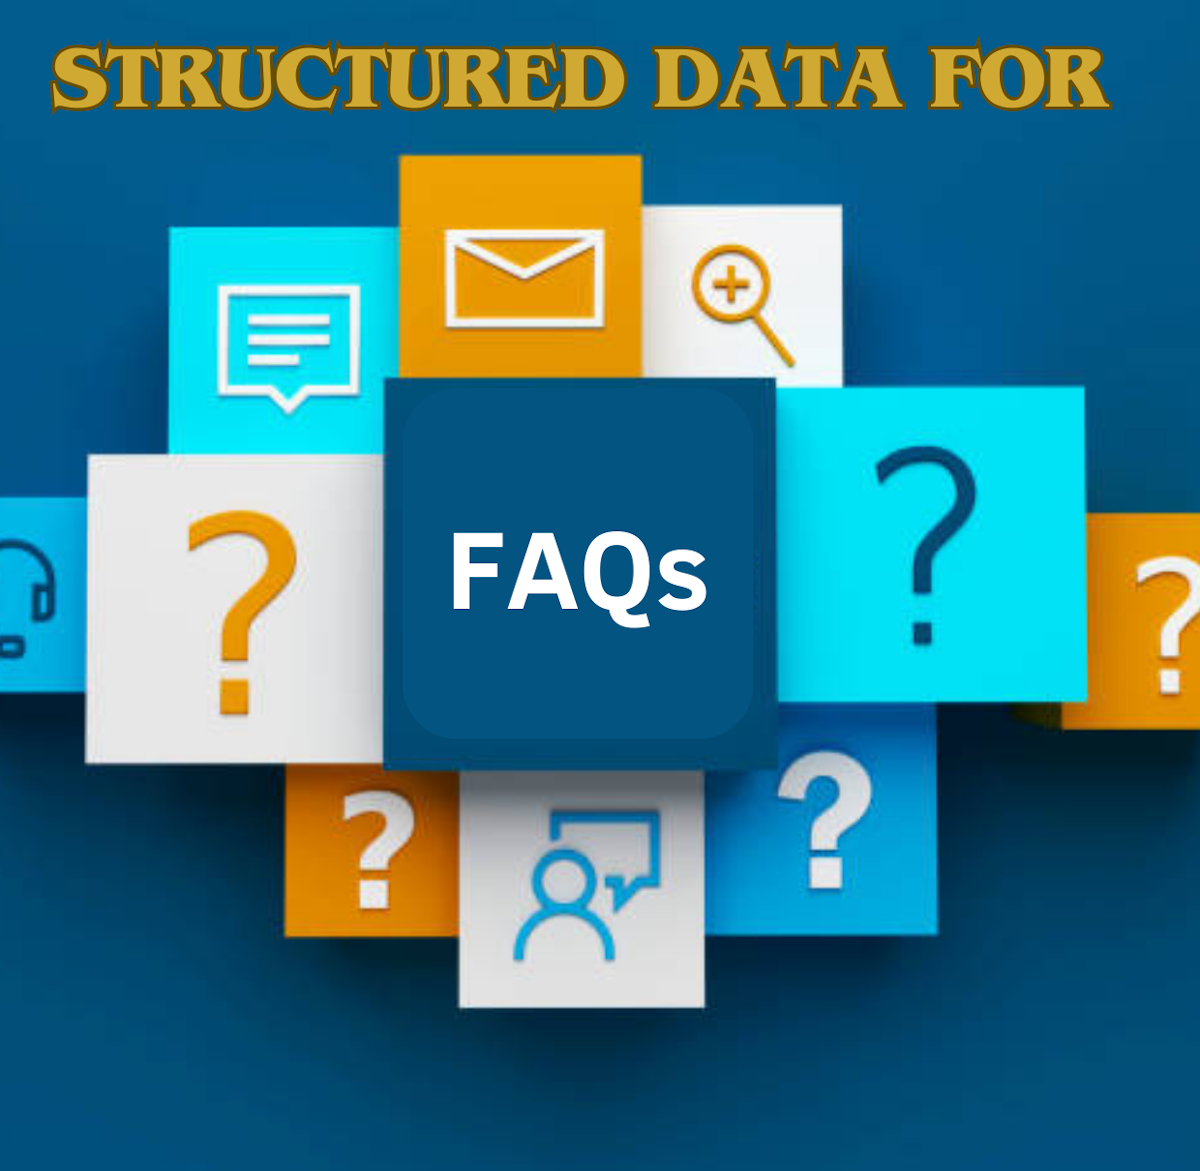 Structured data for FAQs